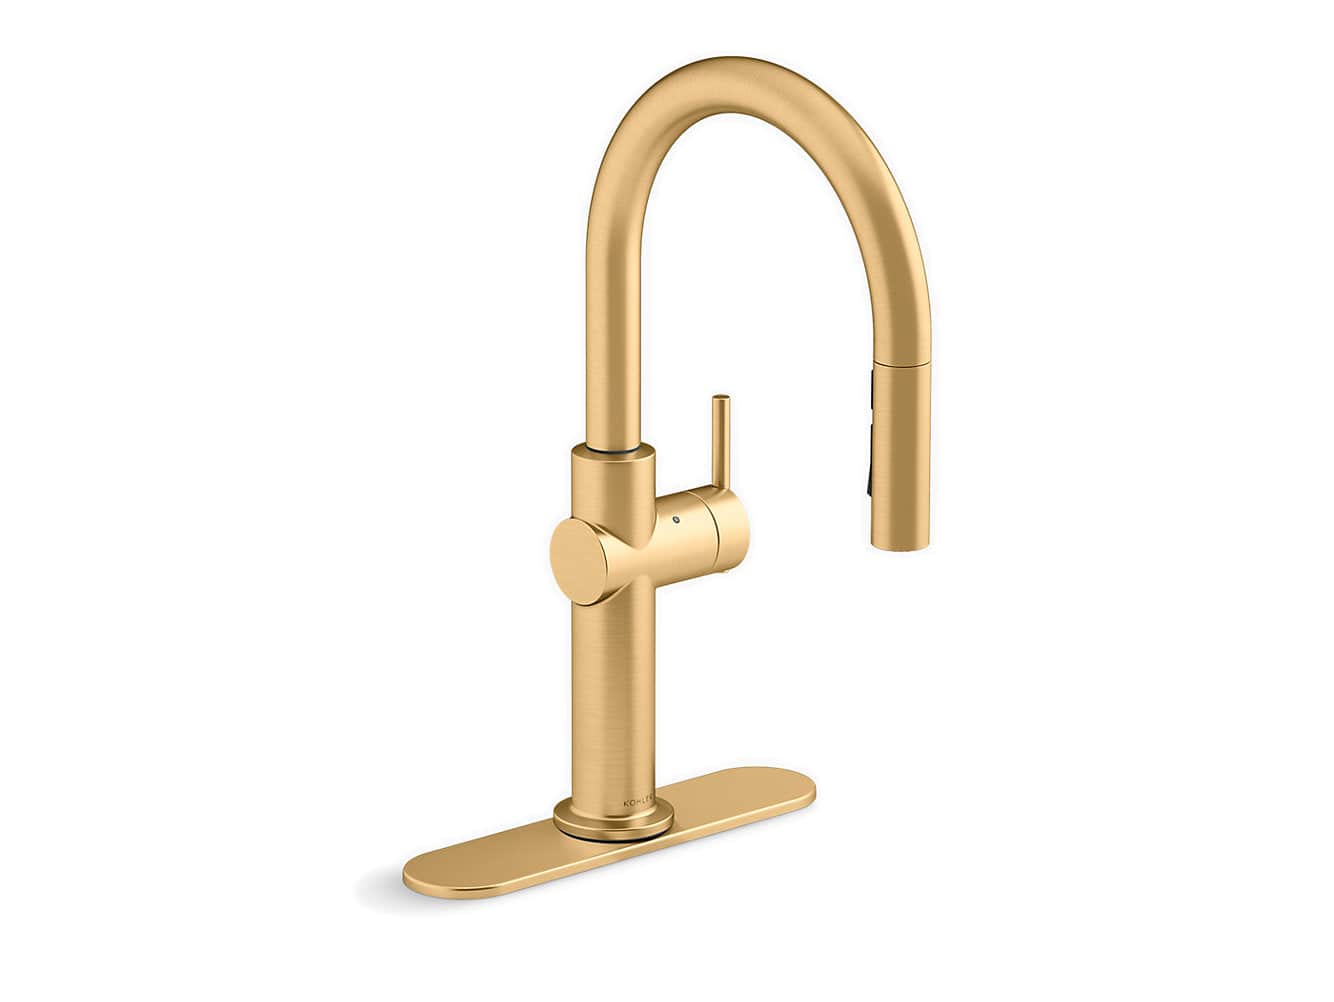 Kohler Crue 17" Contemporary Kitchen Faucet With Kohler Konnect And Voice Activated Technology- Vibrant Brushed Brass - Renoz